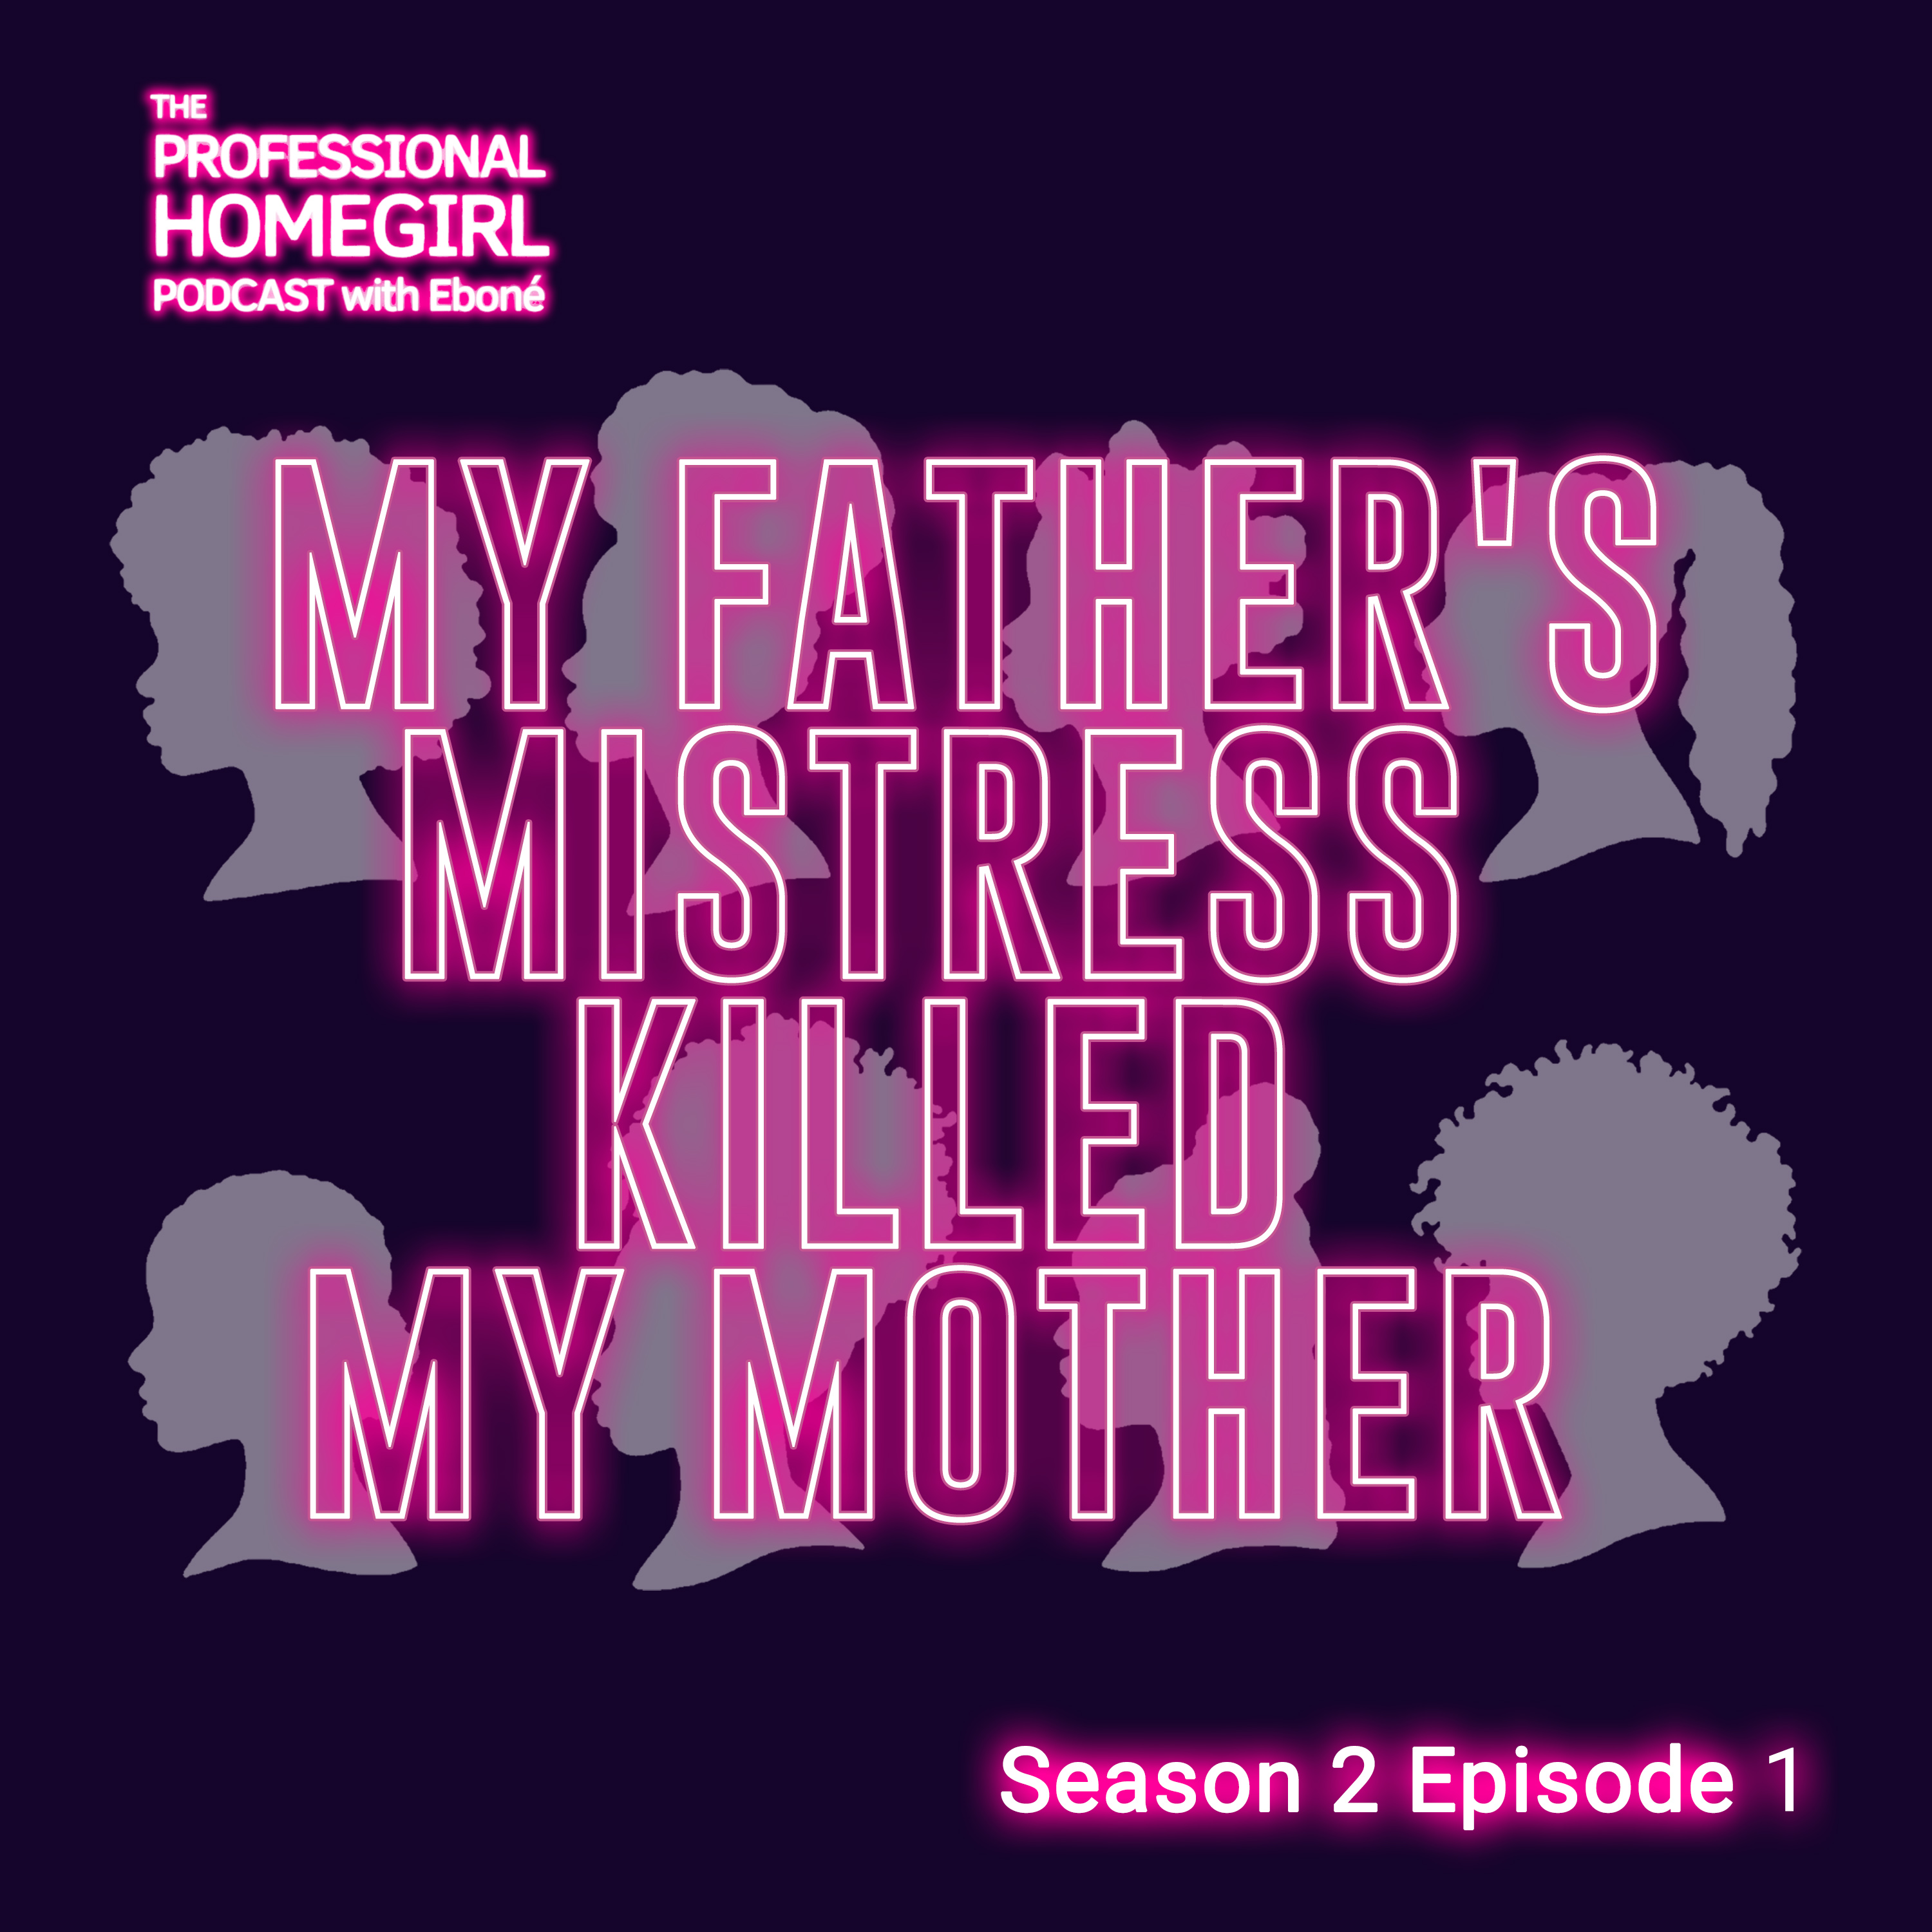 The Professional Homegirl Podcast: My Father’s Mistress Killed My Mother